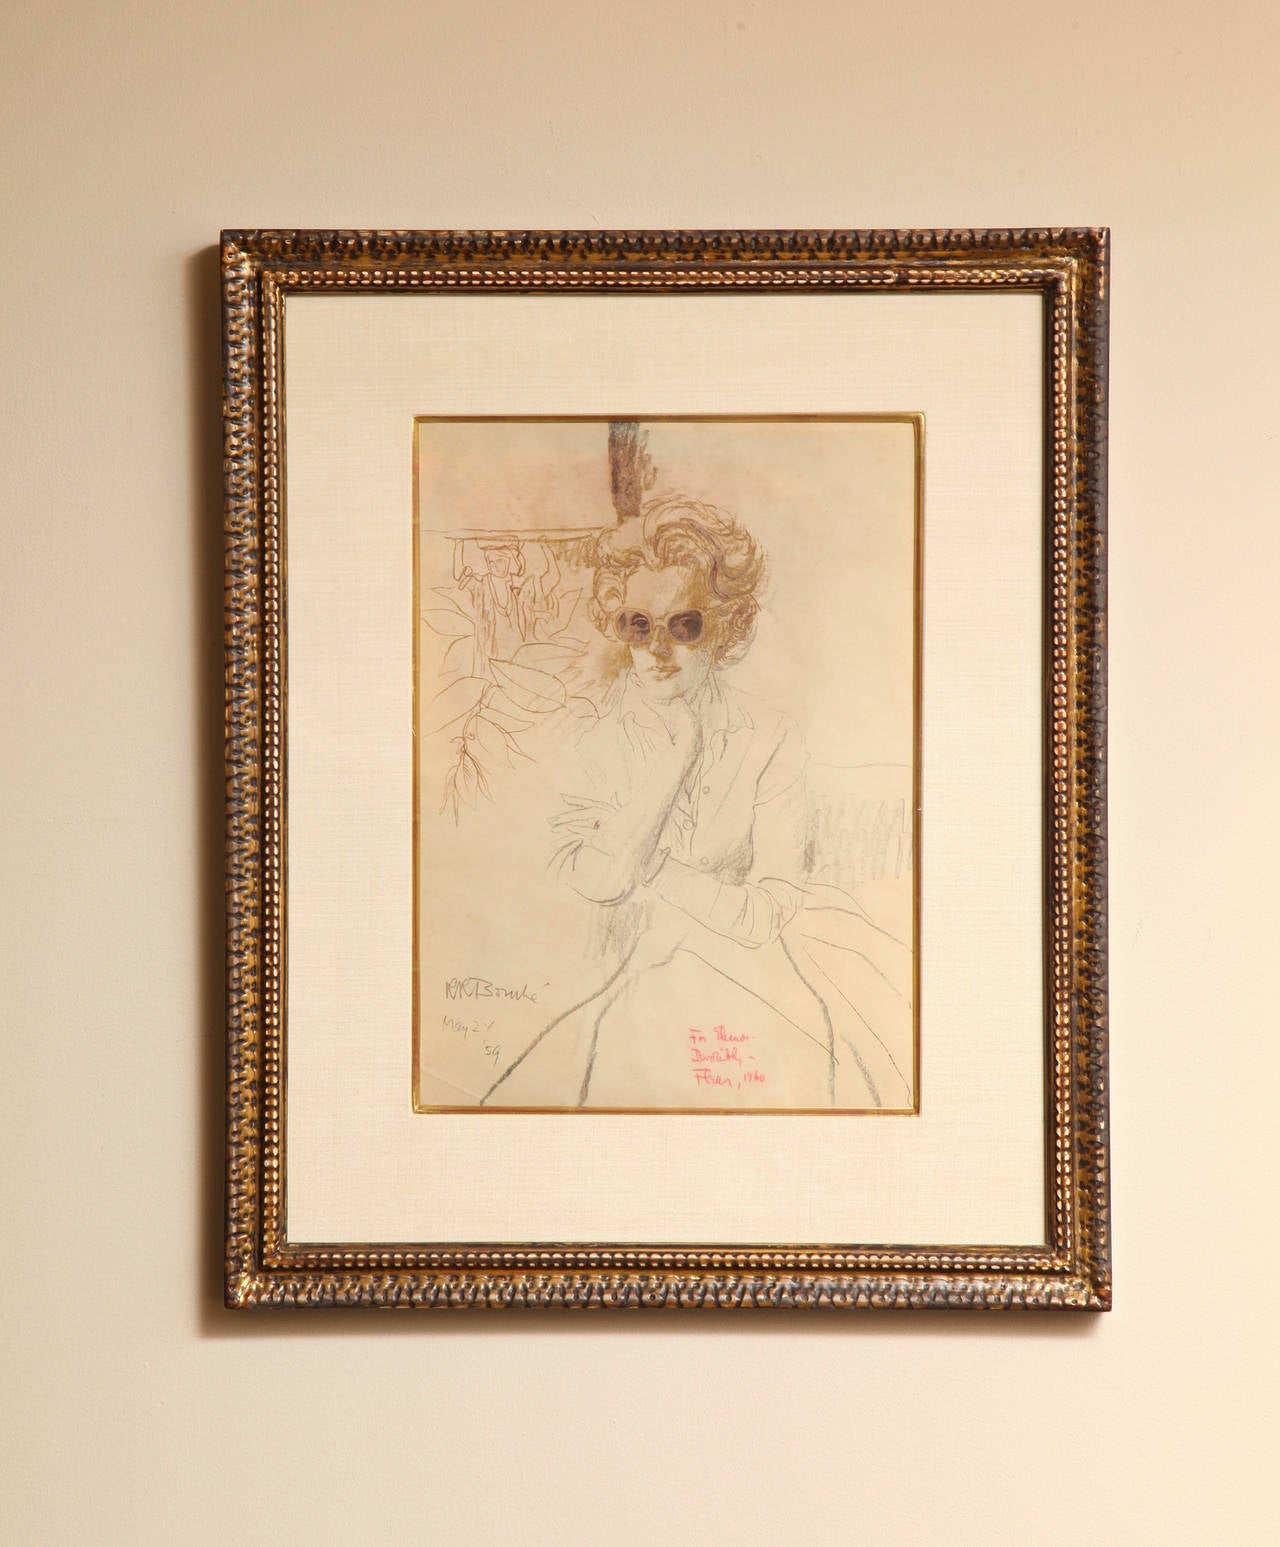 A Rene Bouche print given by Fleur Cowles to Eleanor Lambert. Signed R.R. Bouche May 24, '59 on lower left. Cowles' inscription at bottom in red ink.